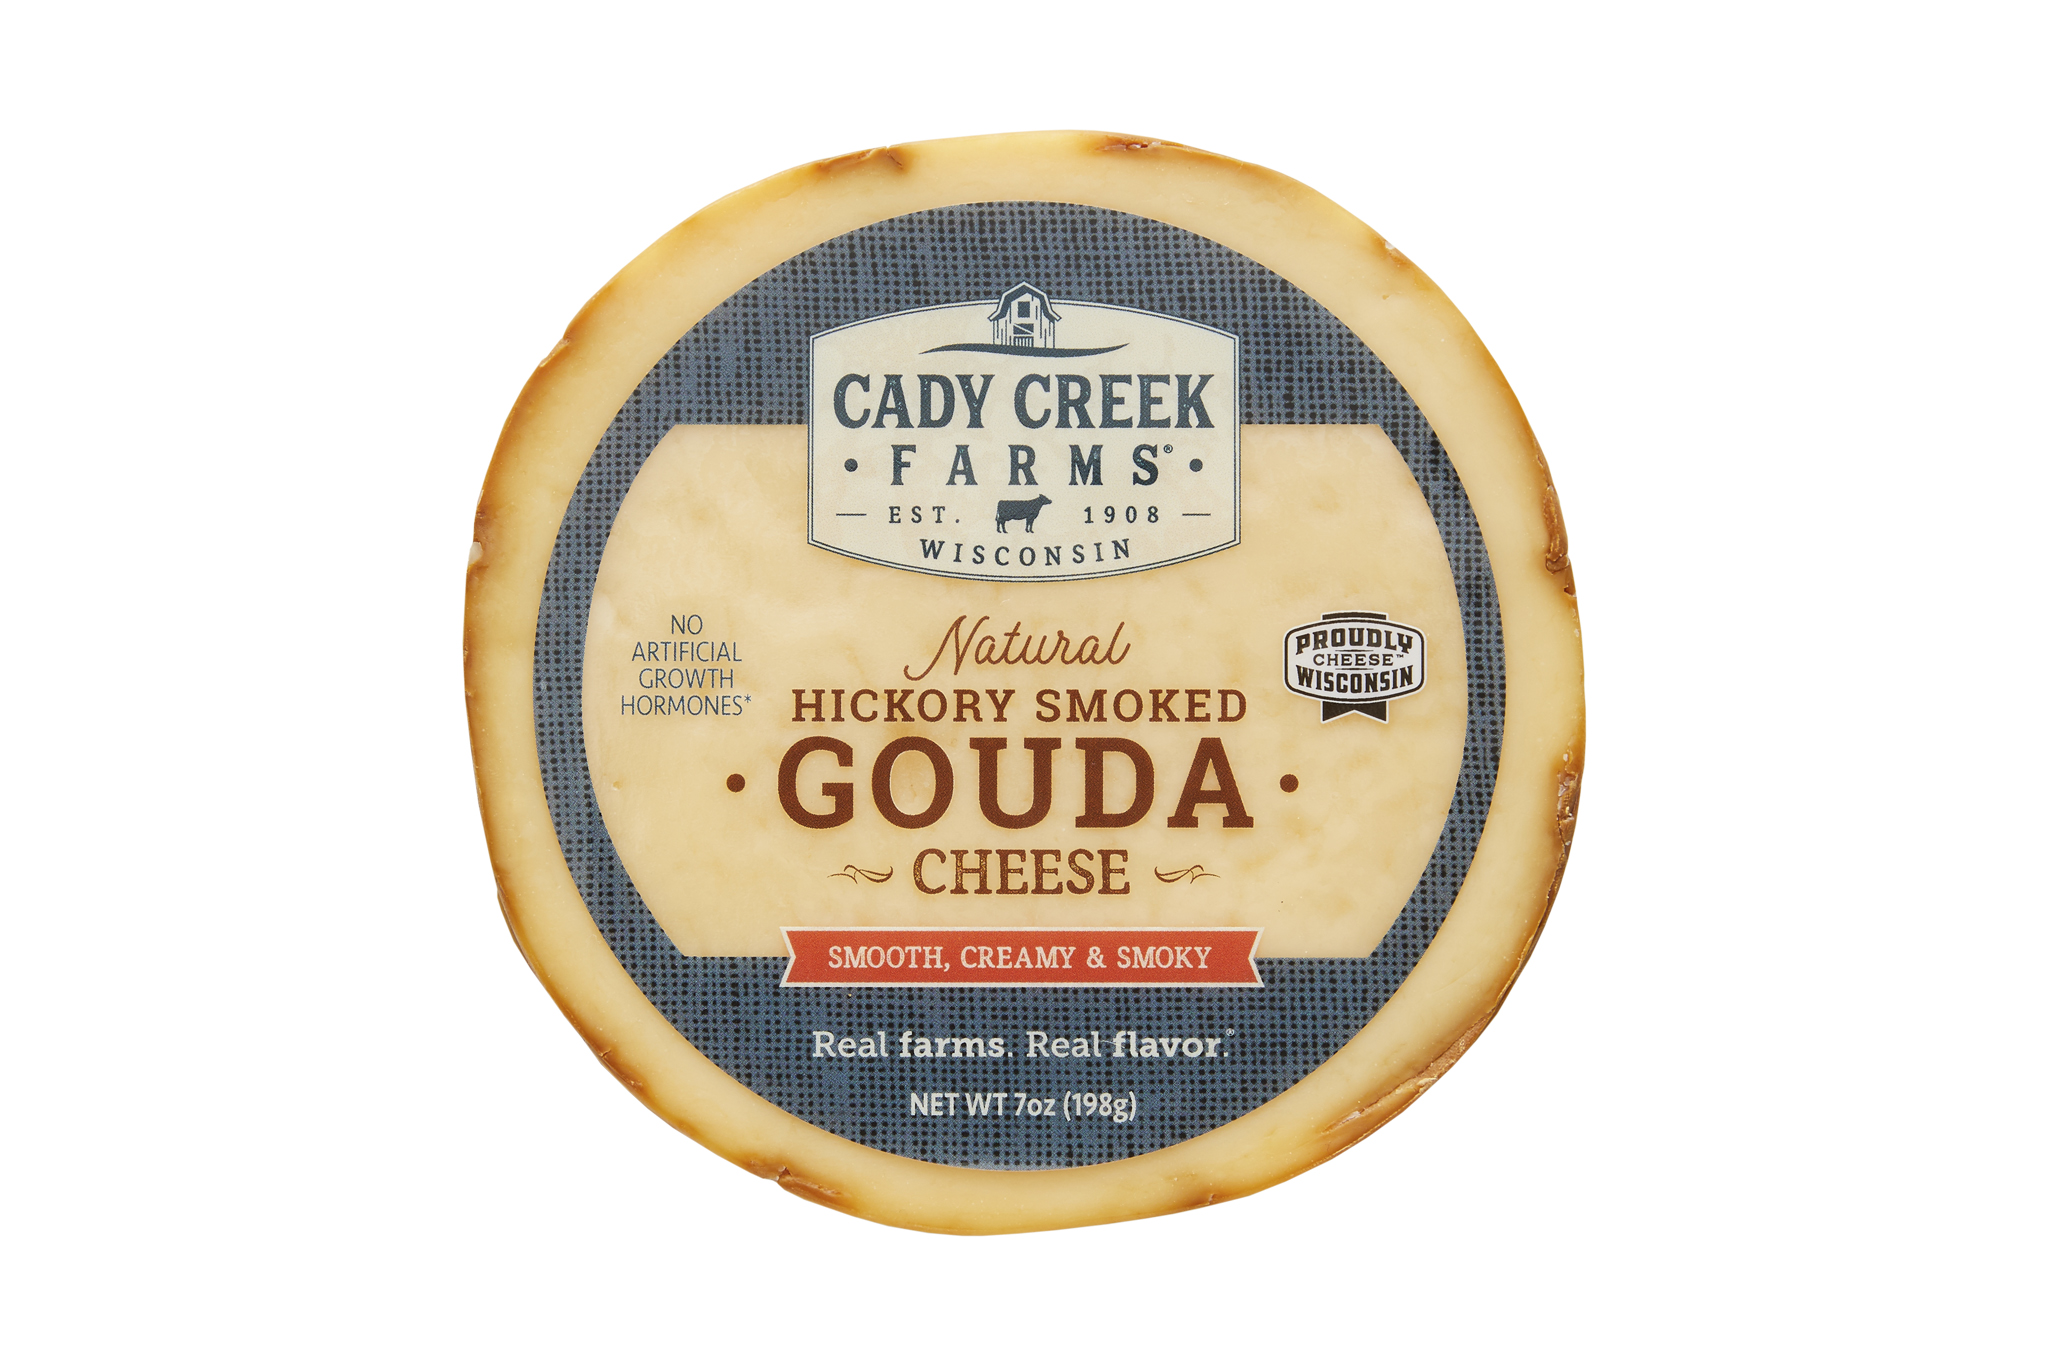 Cady Creek Farms Smoked Gouda 7 oz front package